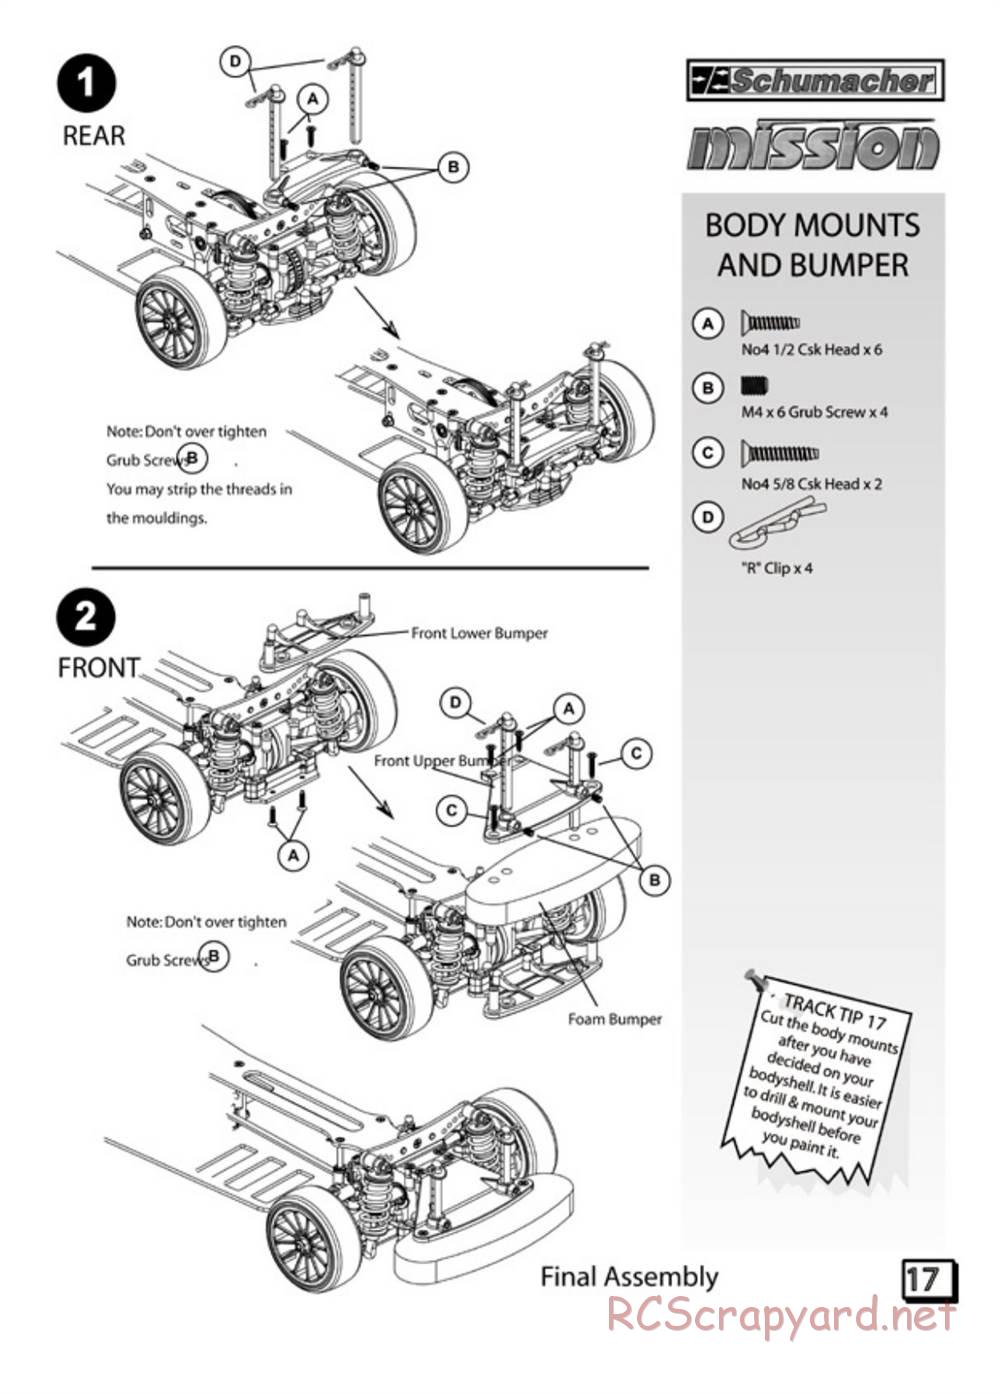 Schumacher - Mission - Manual - Page 18